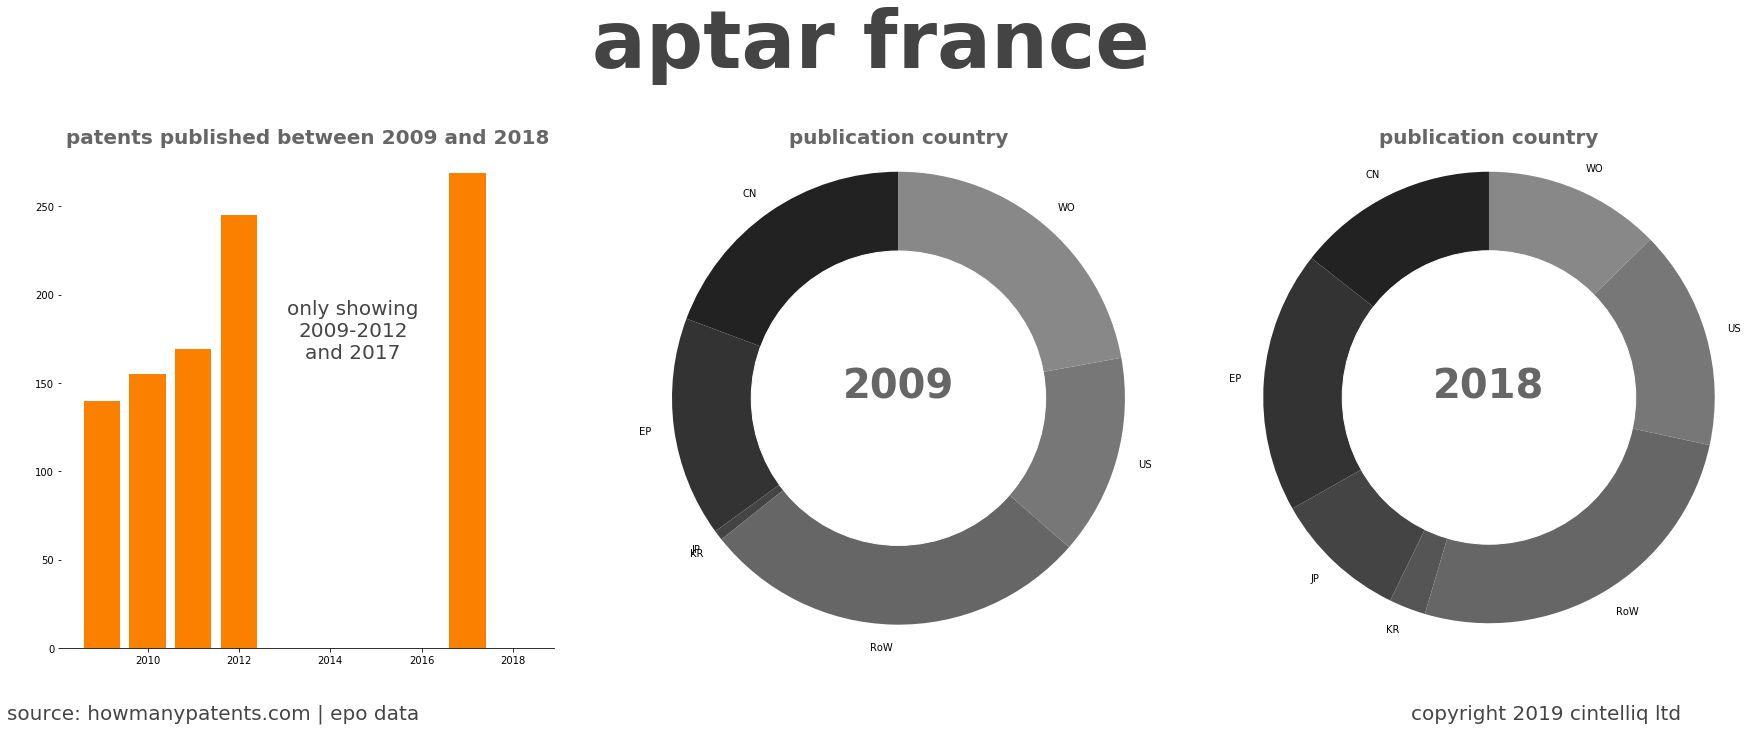 summary of patents for Aptar France